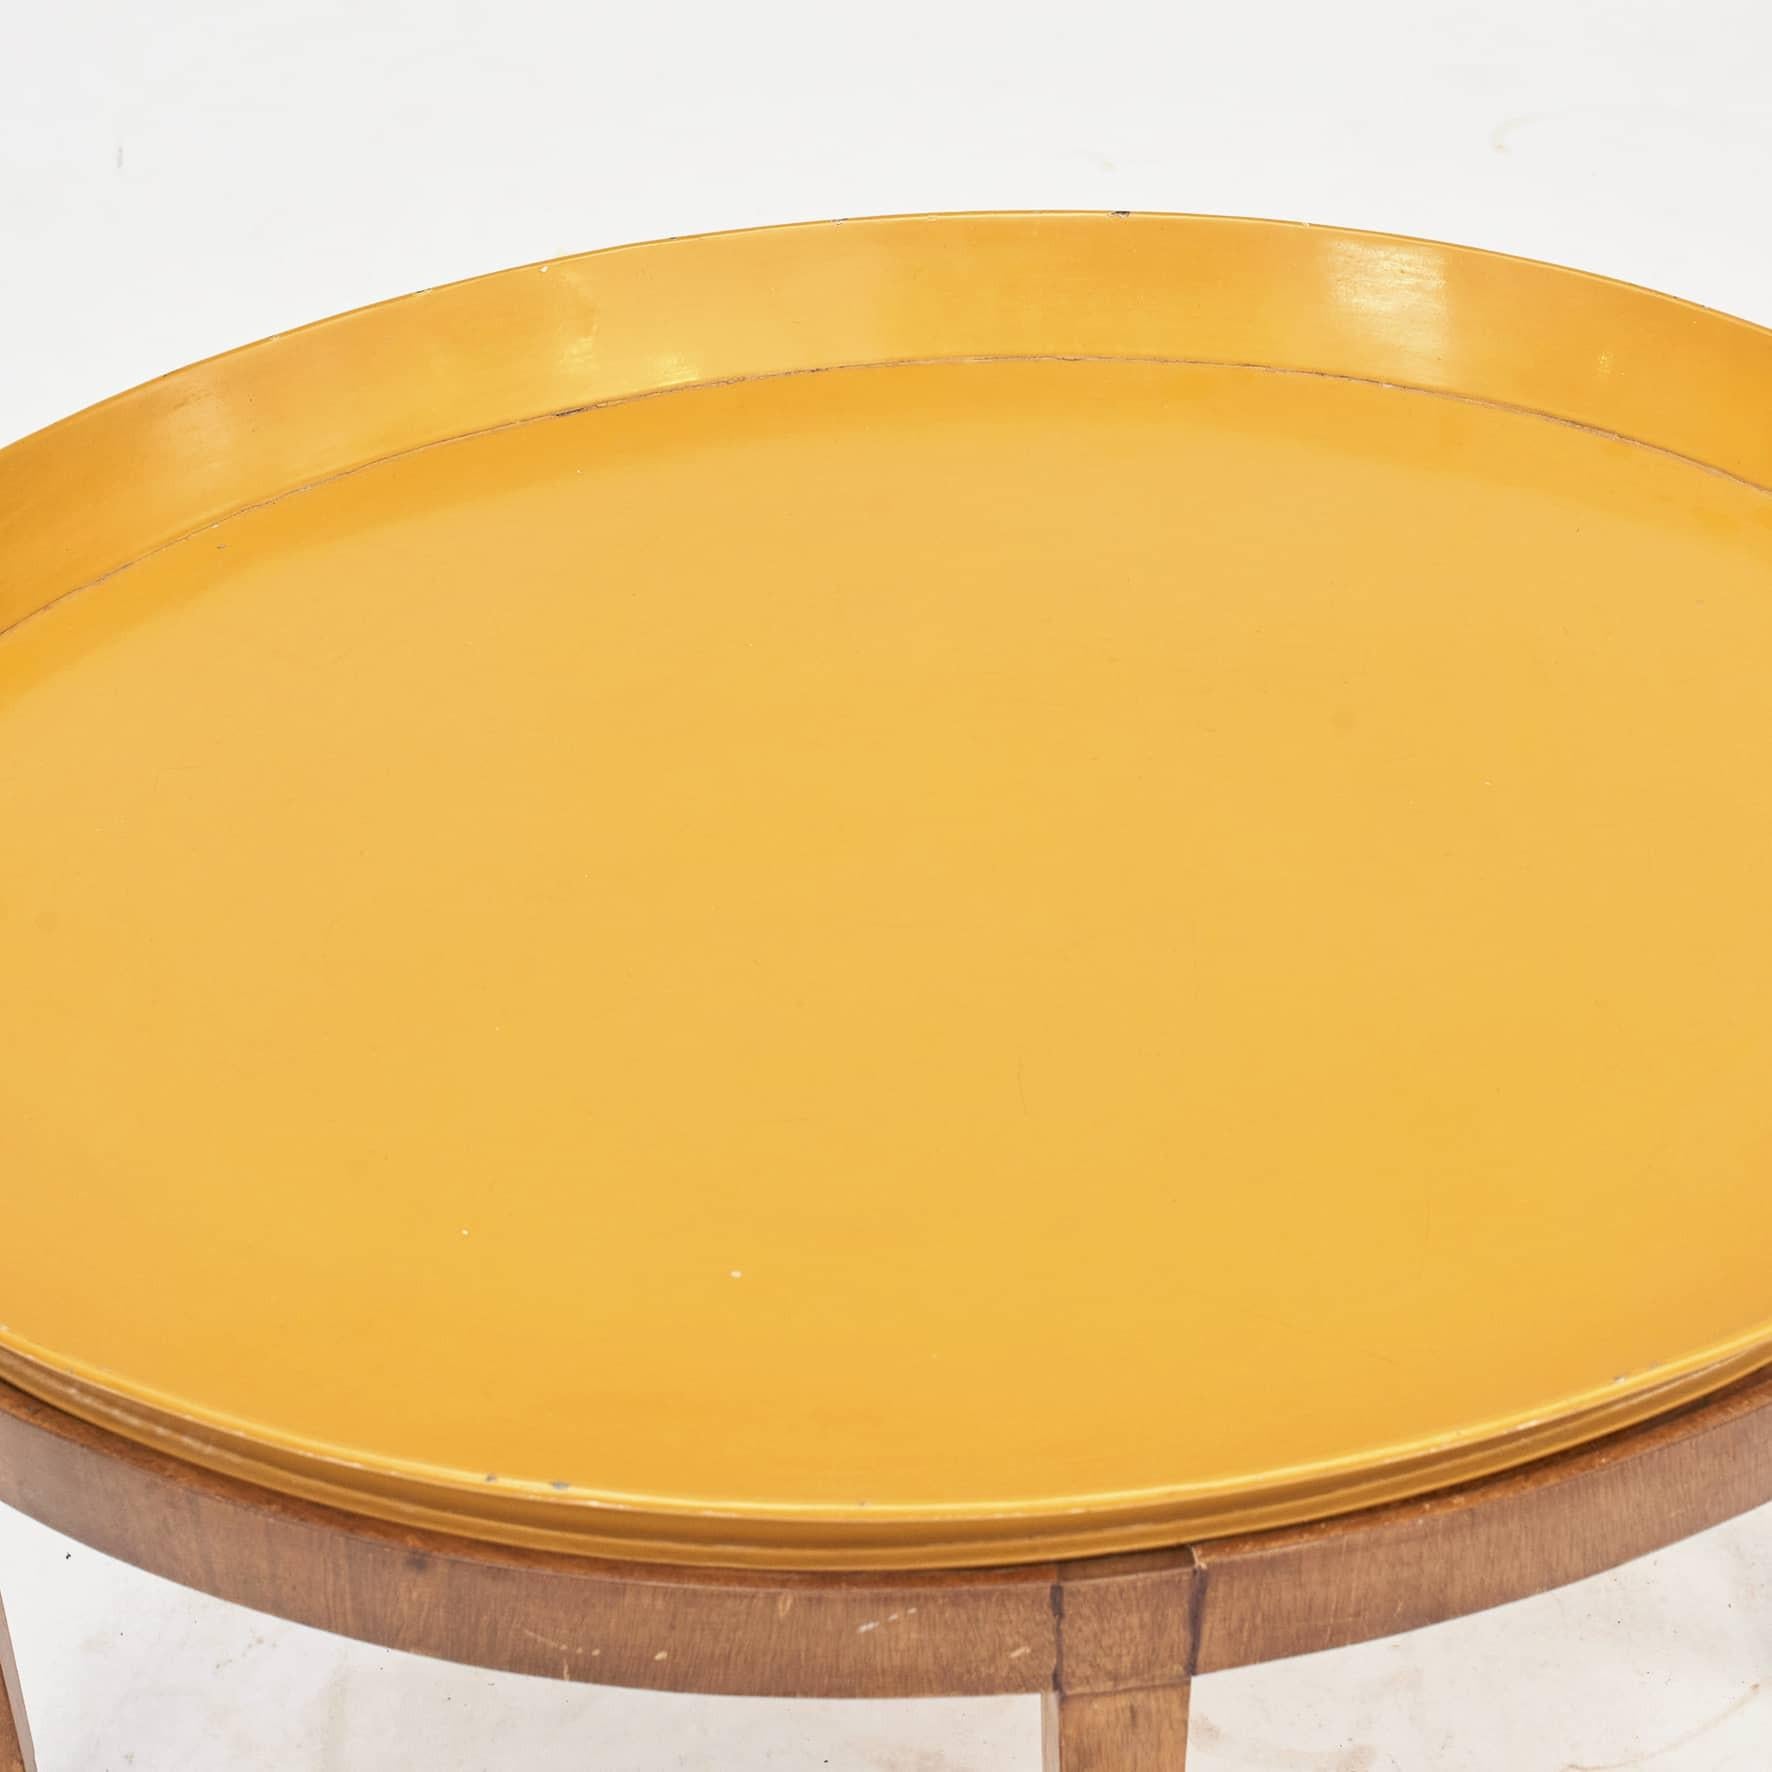 Danish Empire Yellow Metal Tray Table, Denmark Early 19th Century In Good Condition For Sale In Kastrup, DK